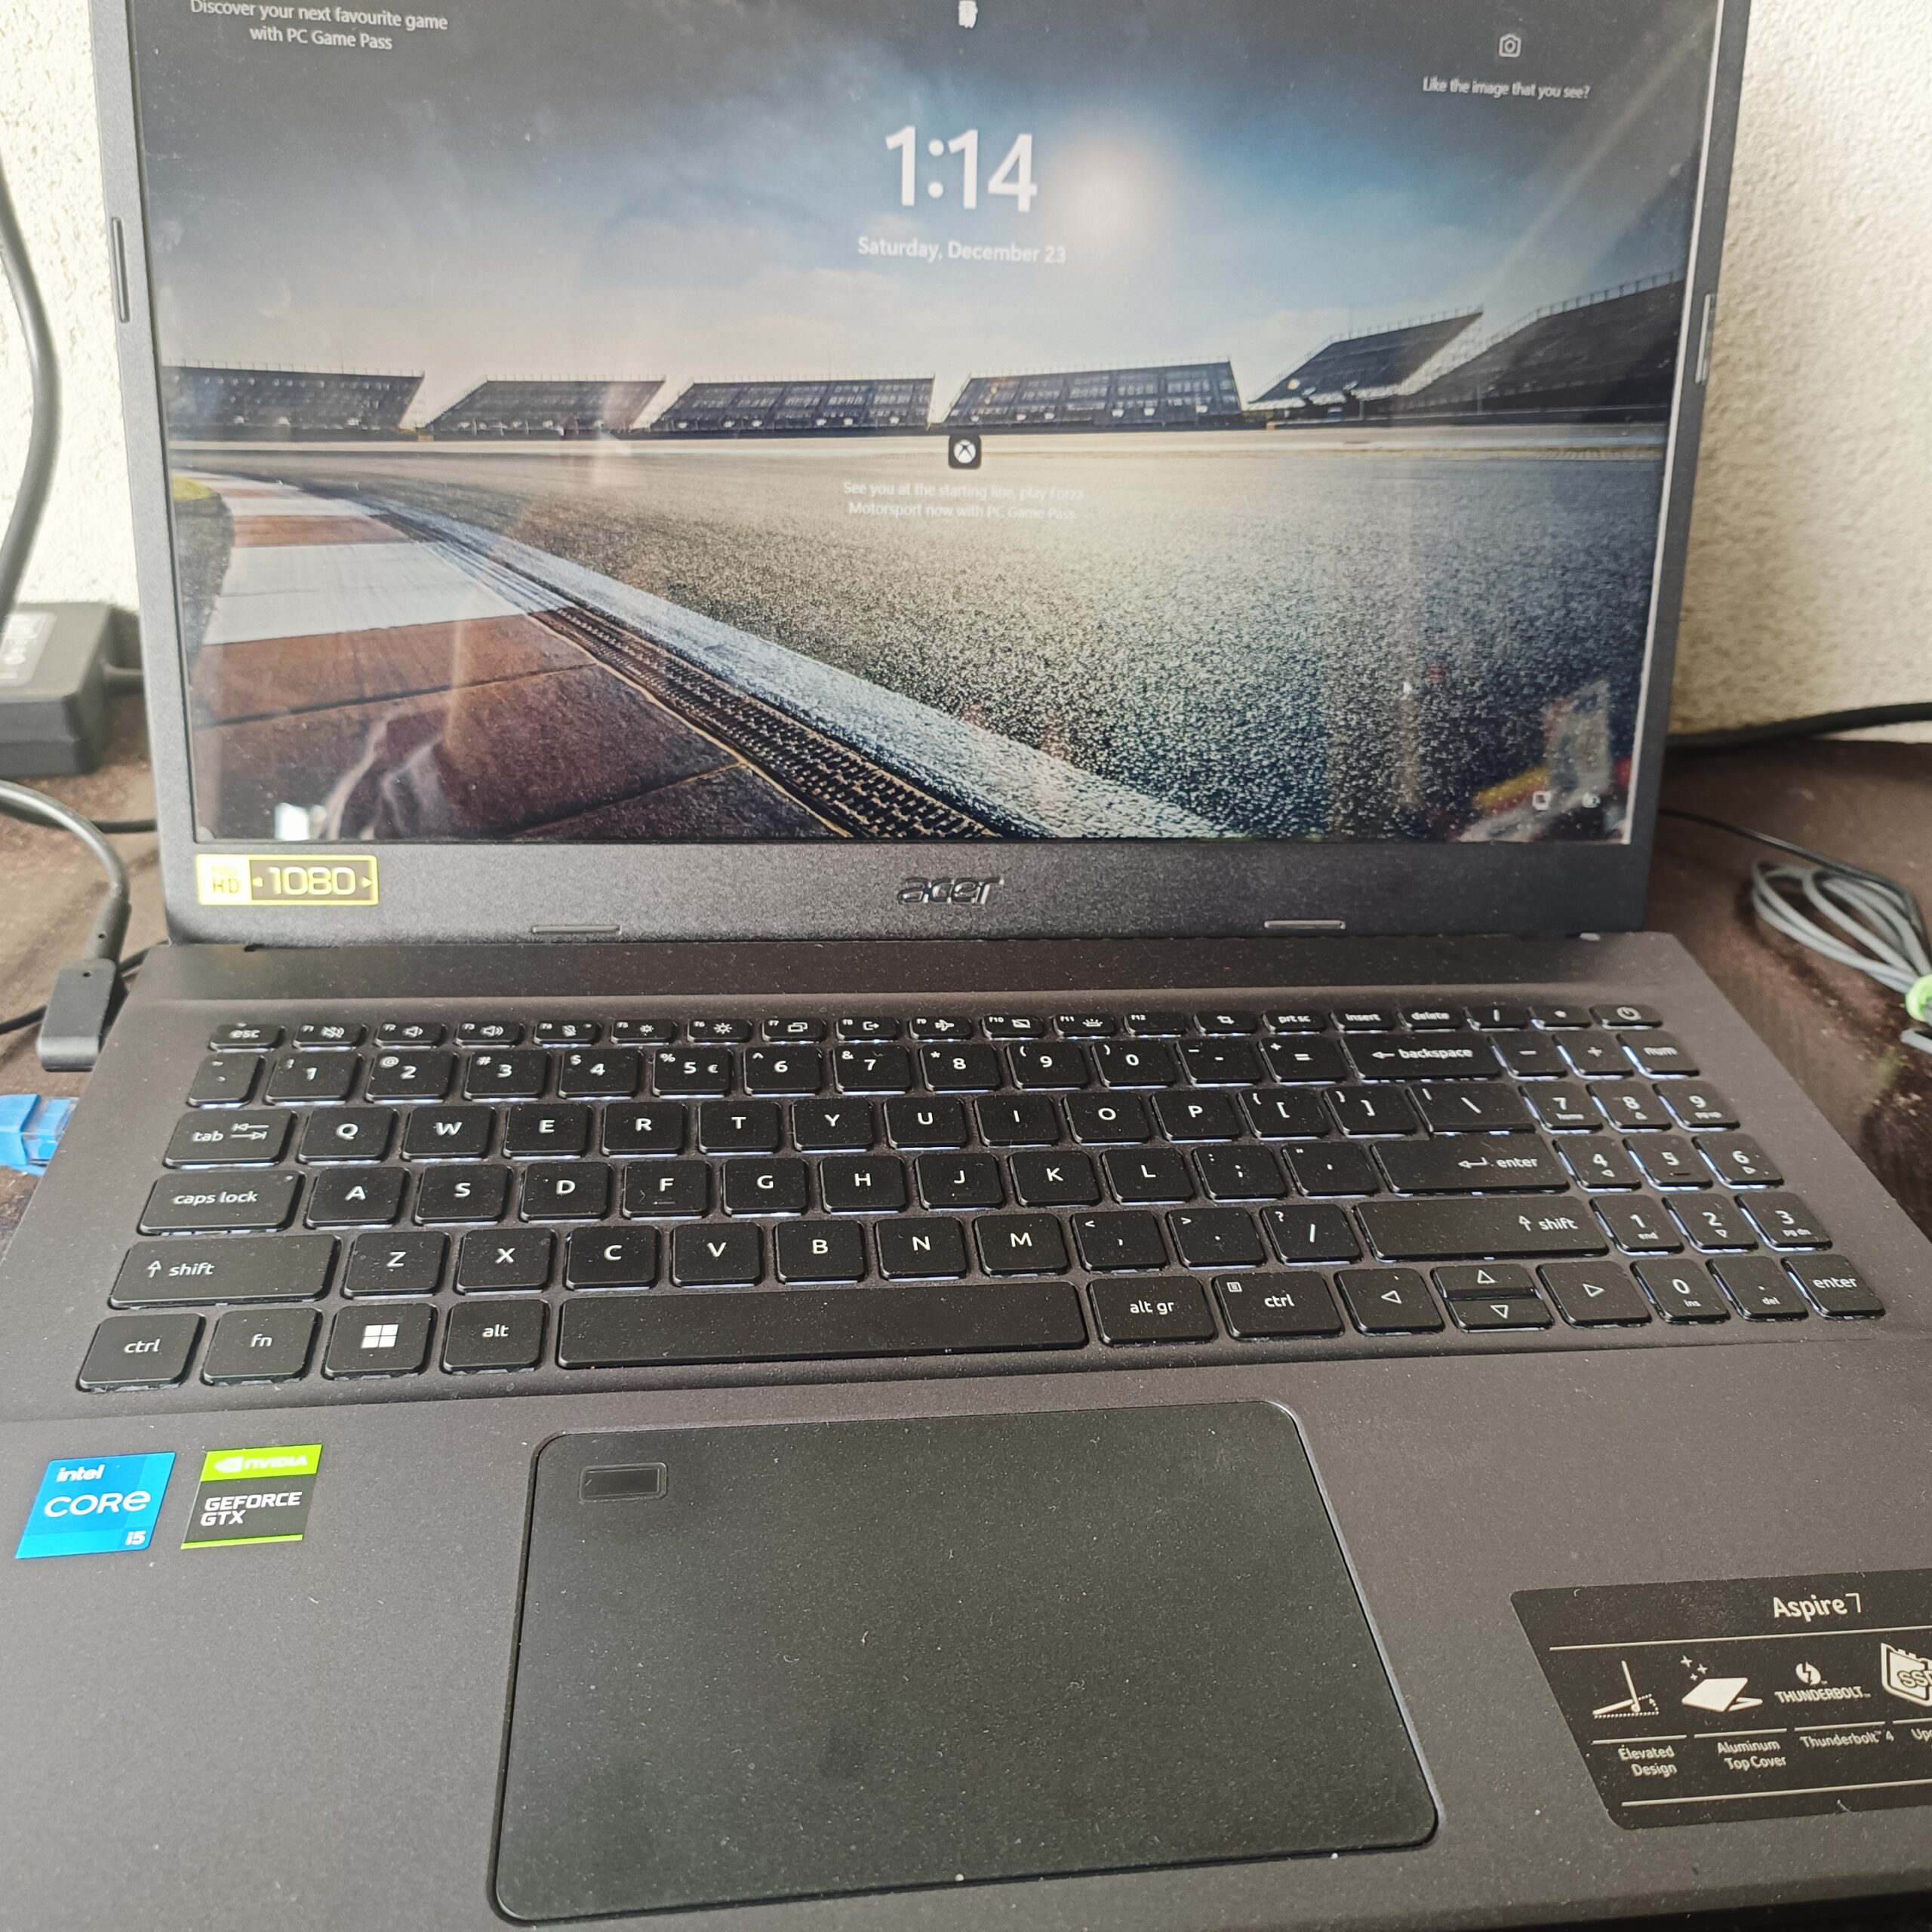 Acer Aspire 7 Laptop Review after used